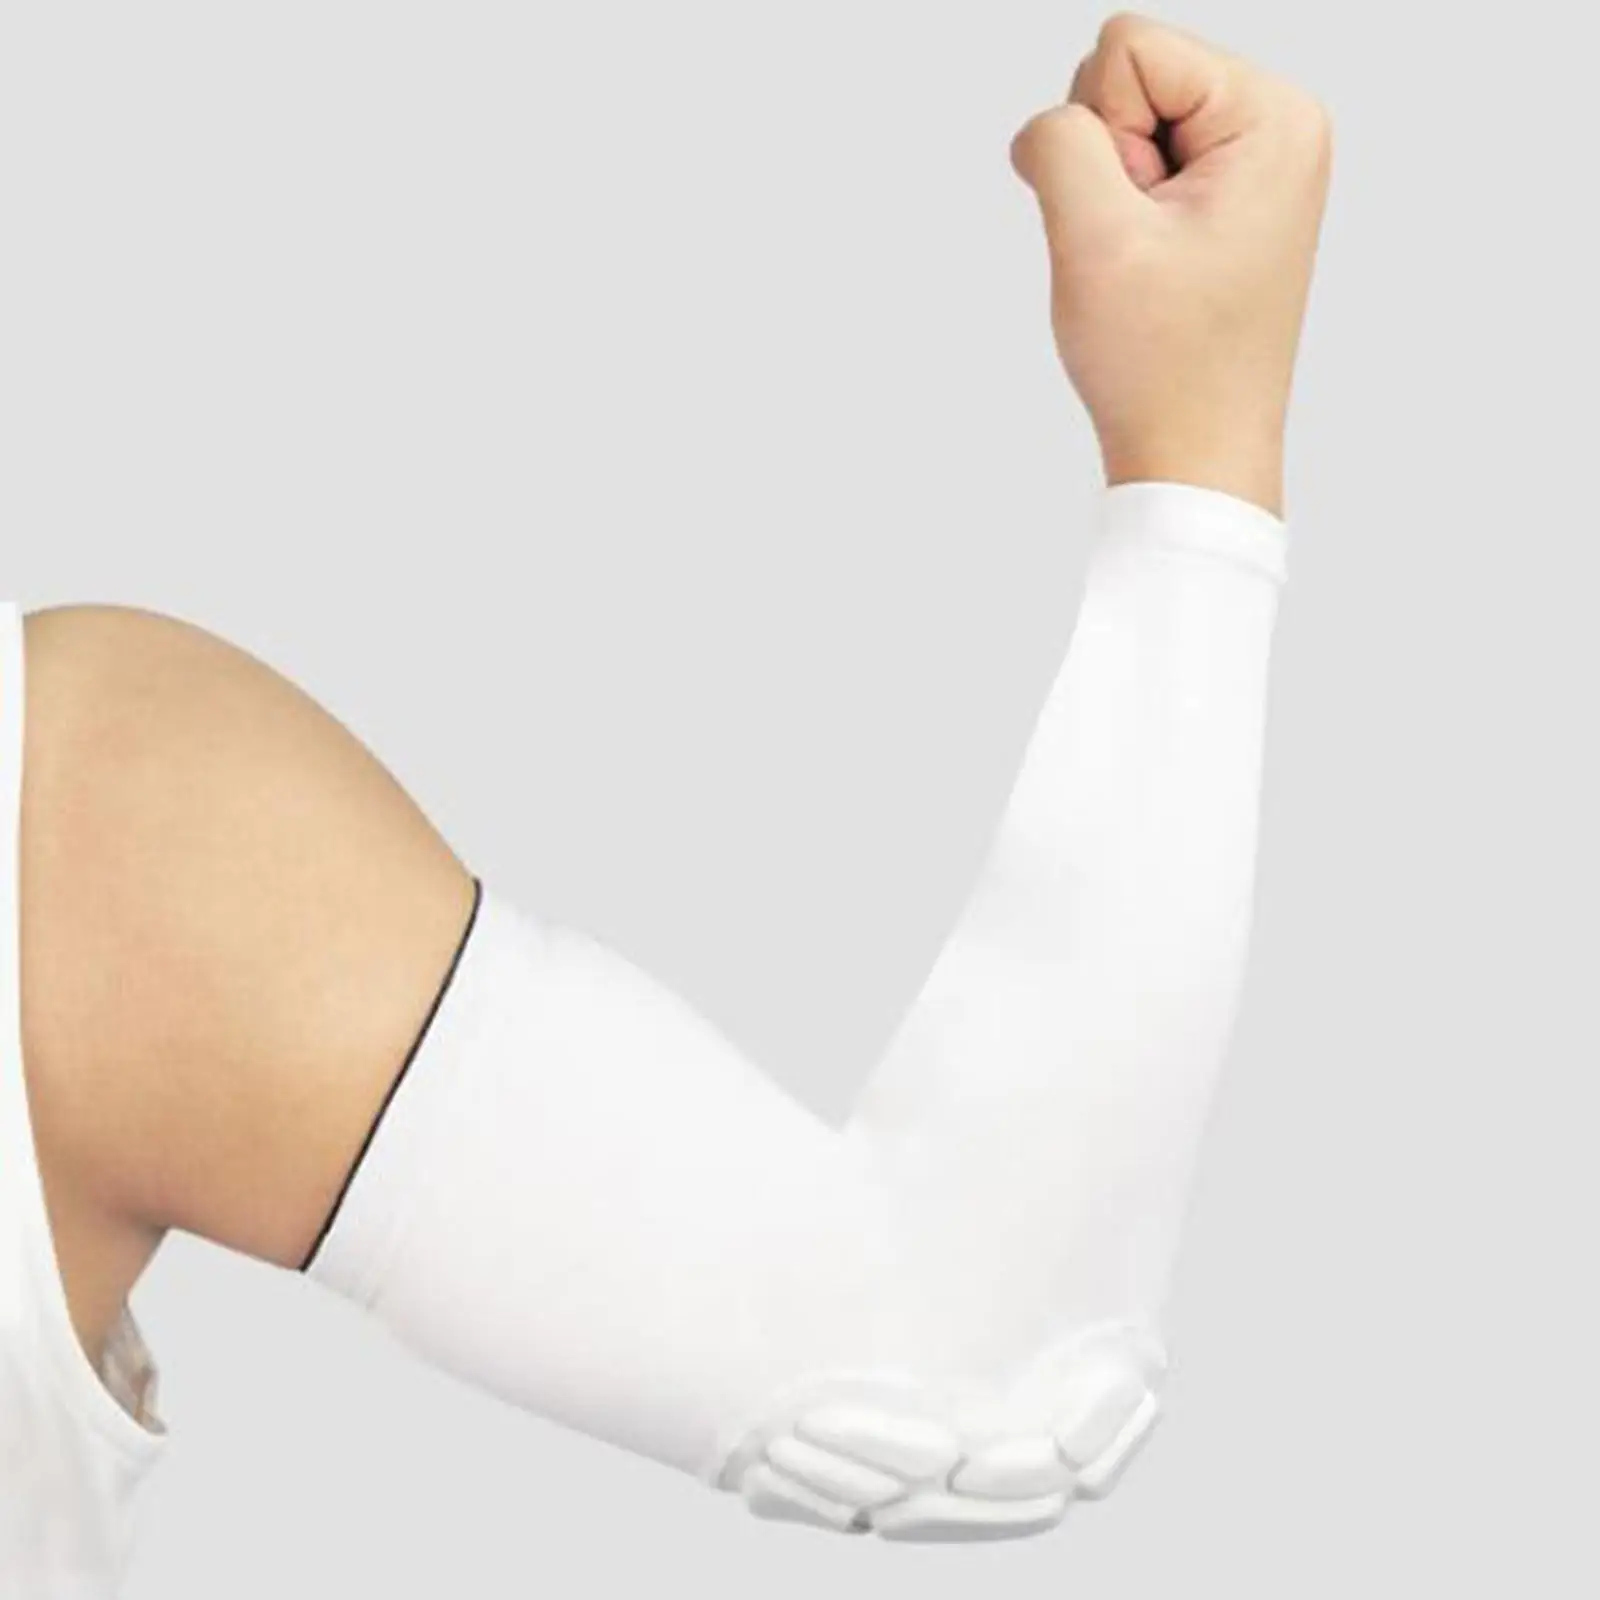 1PC Compression Elbow Pad Elbow Sleeve for Baseball Gym Men